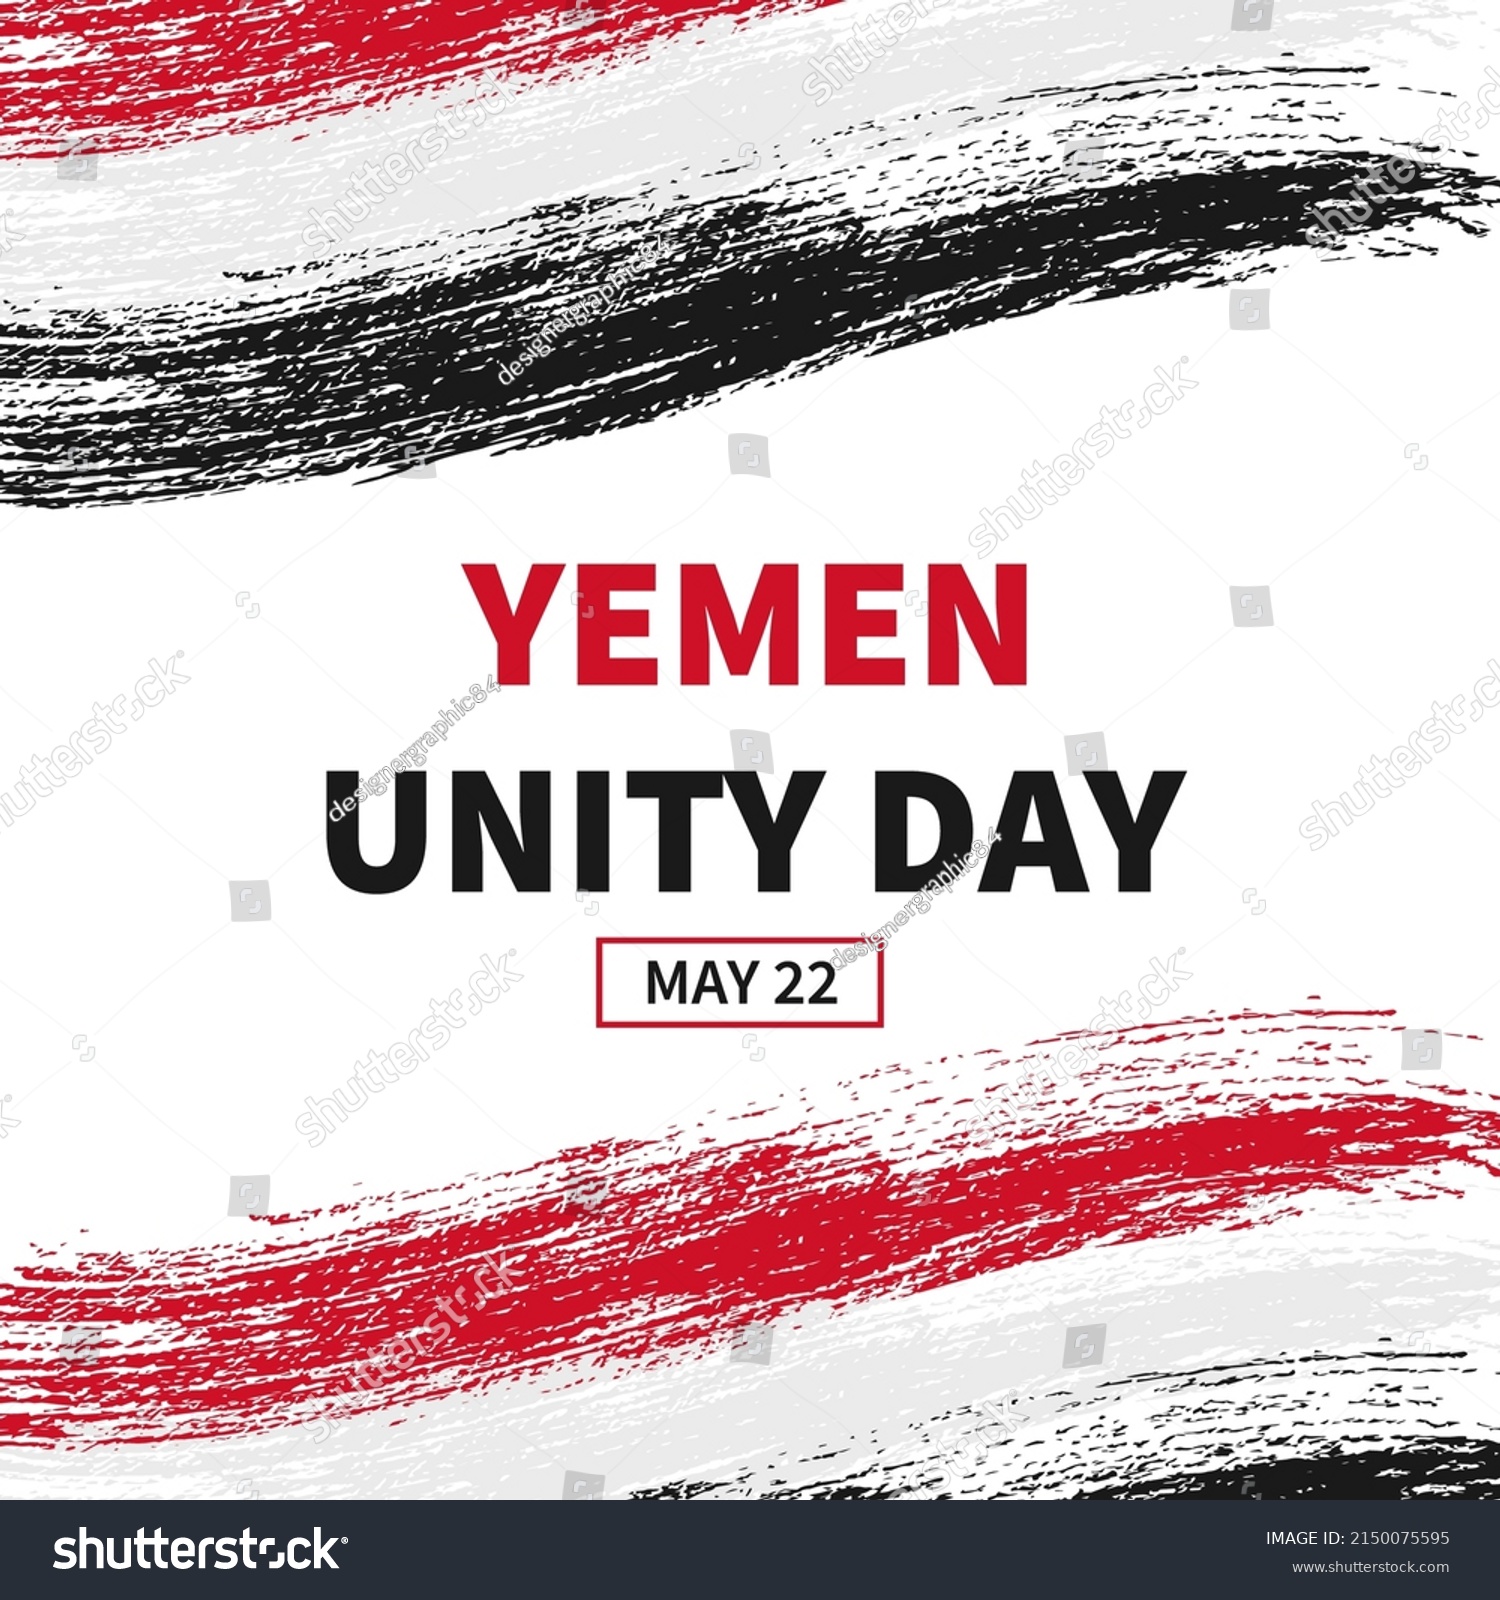 SVG of Yemen National Unity Day typography poster. National holiday celebration on May 22. Vector template for banner, flyer, greeting card, etc. svg